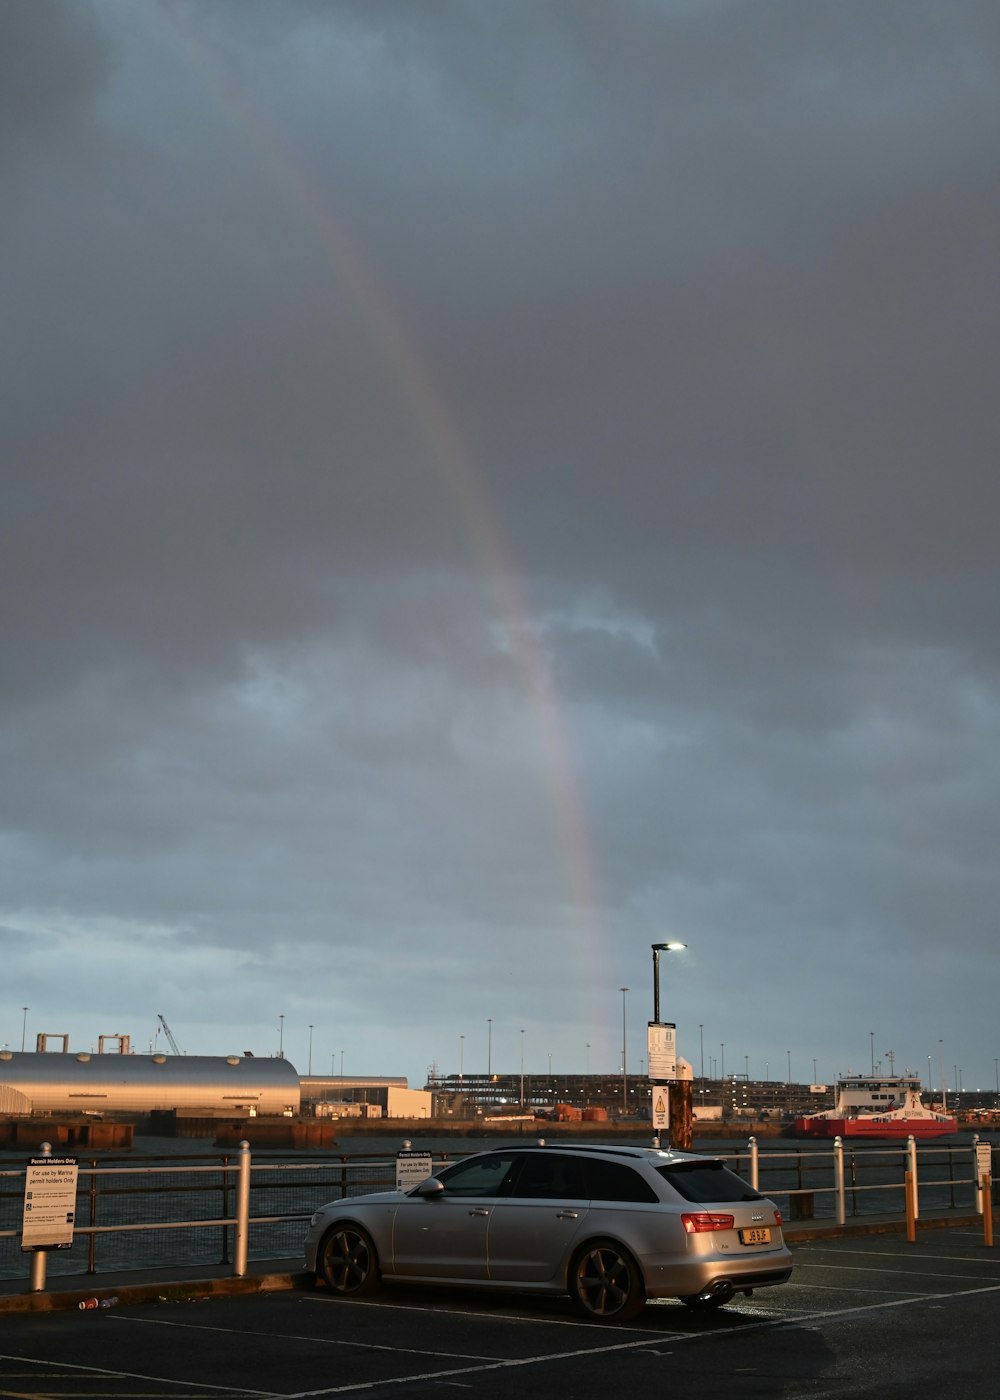 a car parked in a parking lot under a rainbow